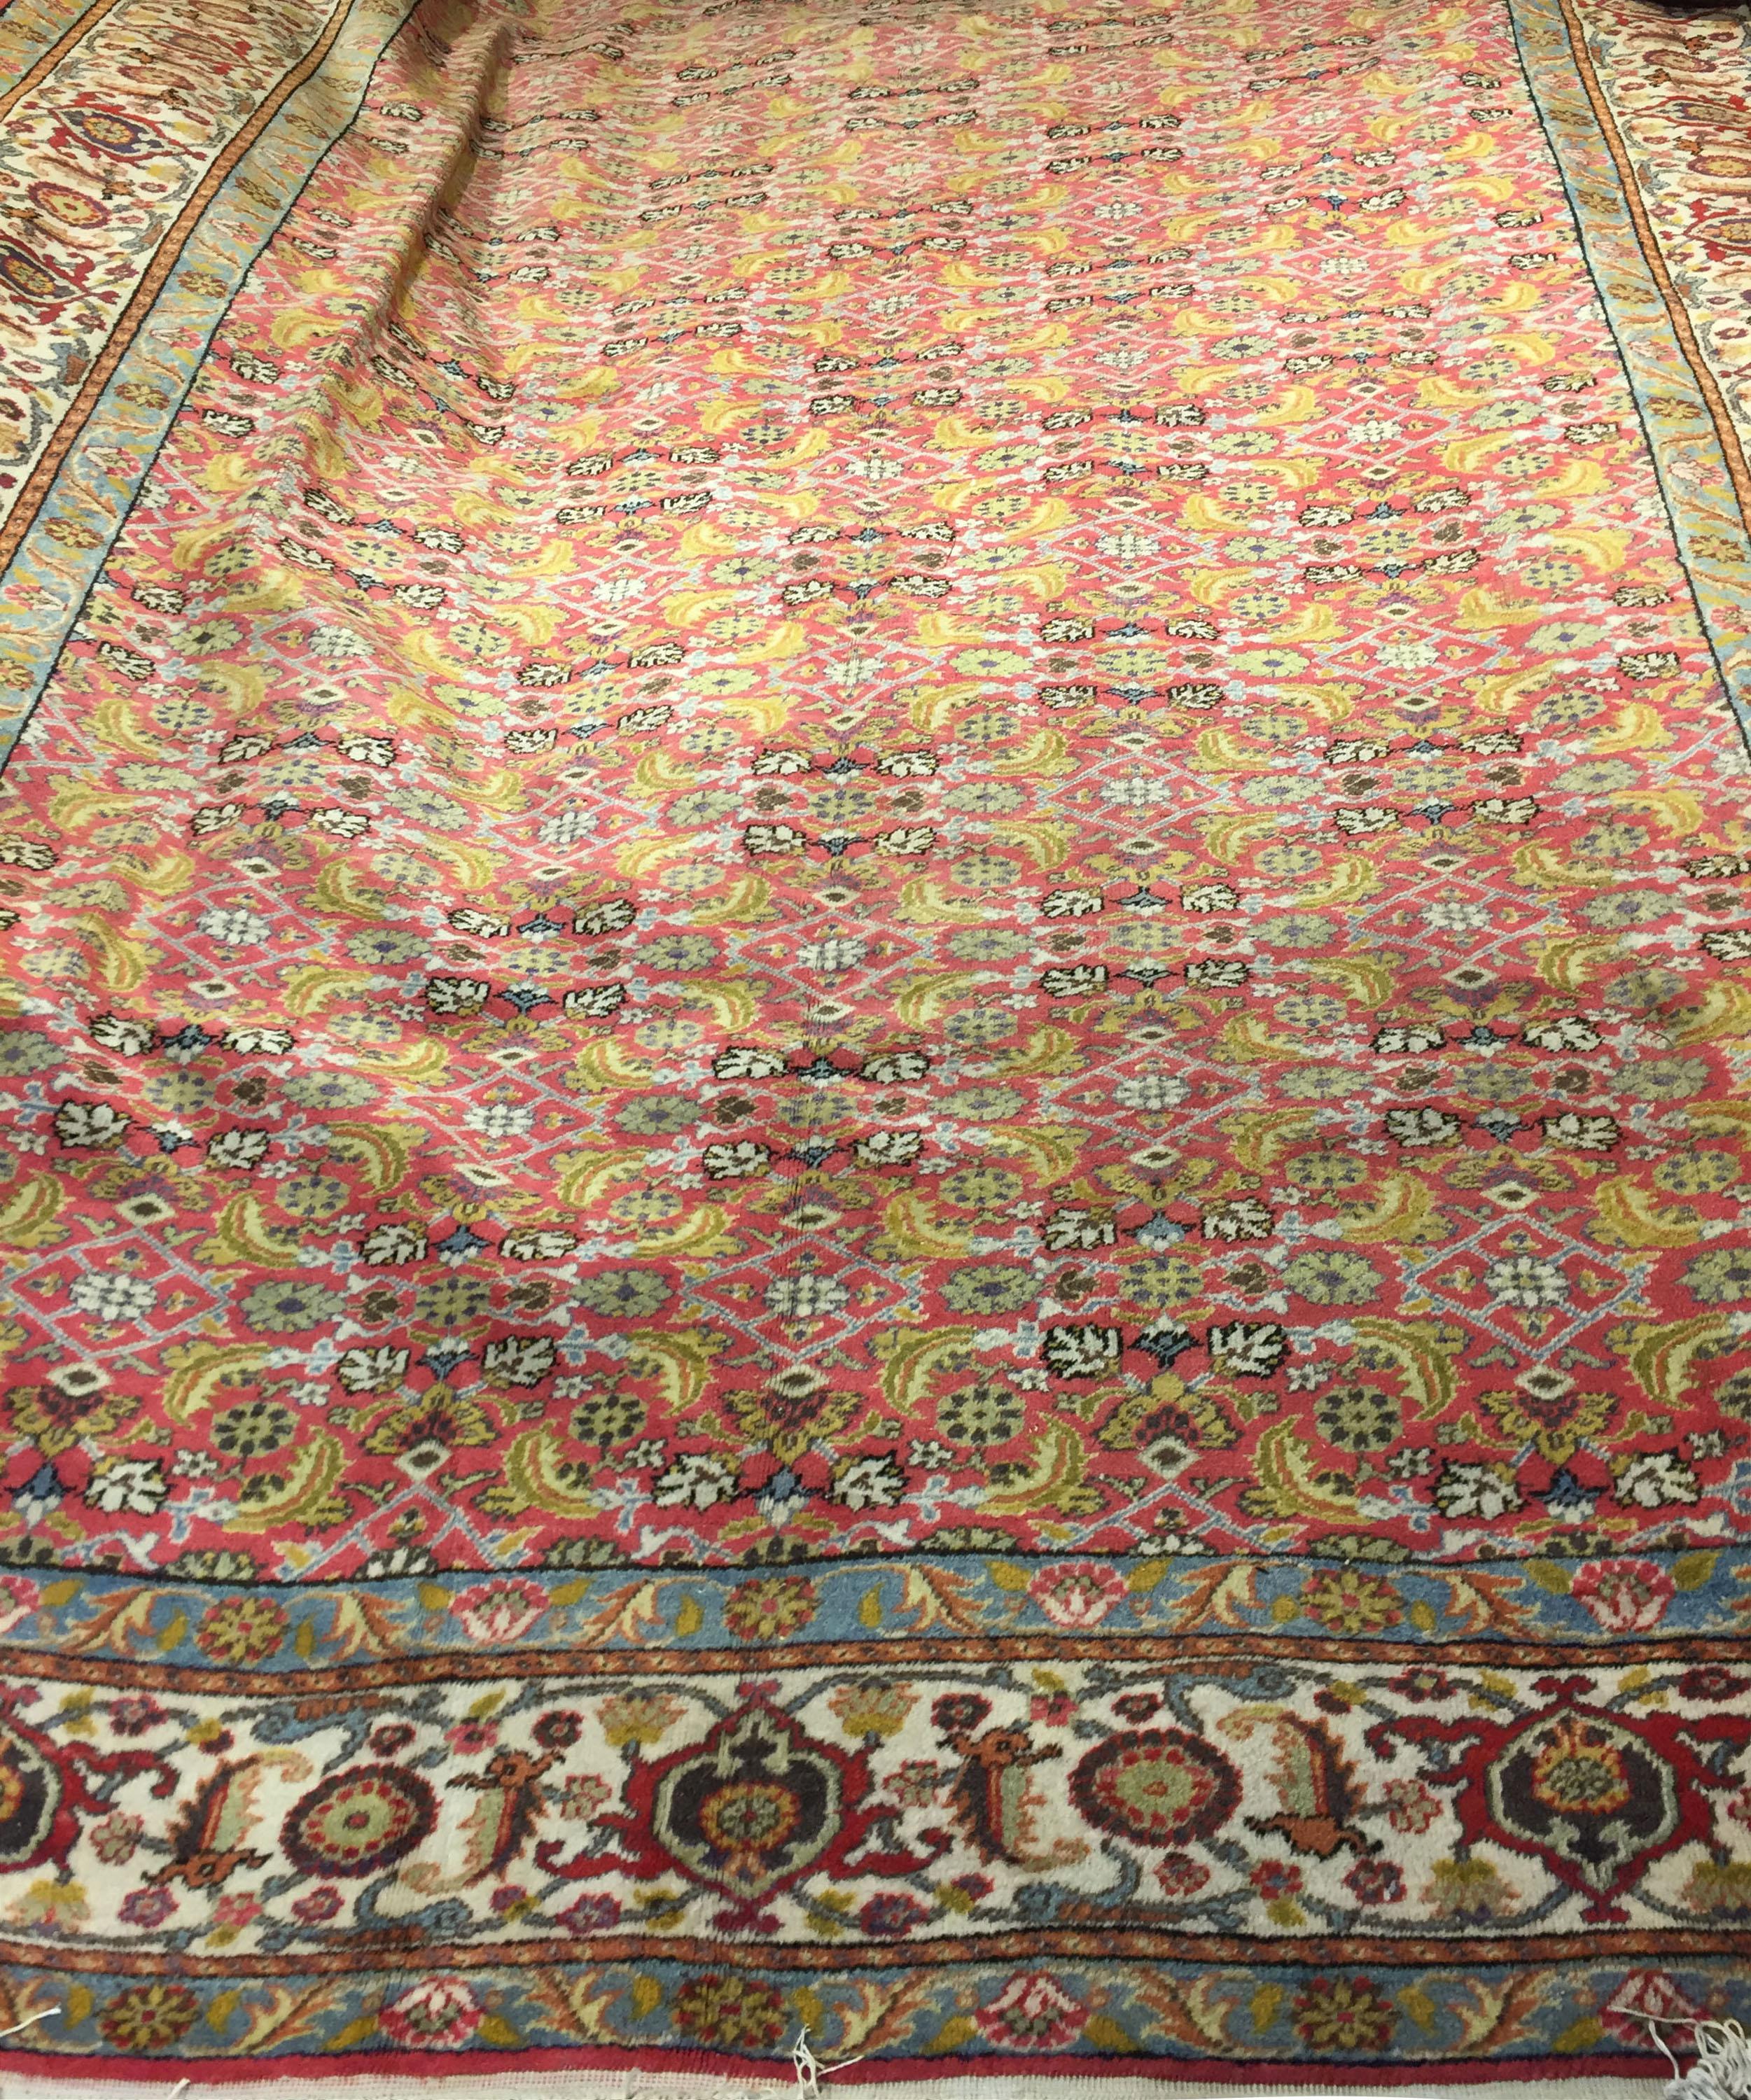 Antique Turkish Sivas rug. A wonderful Turkish Sivas handwoven rug with all the attributes that one looks for in a room size rug. The perfect central filed filled with floral designs coupled with the main border in an ivory color and repeating the